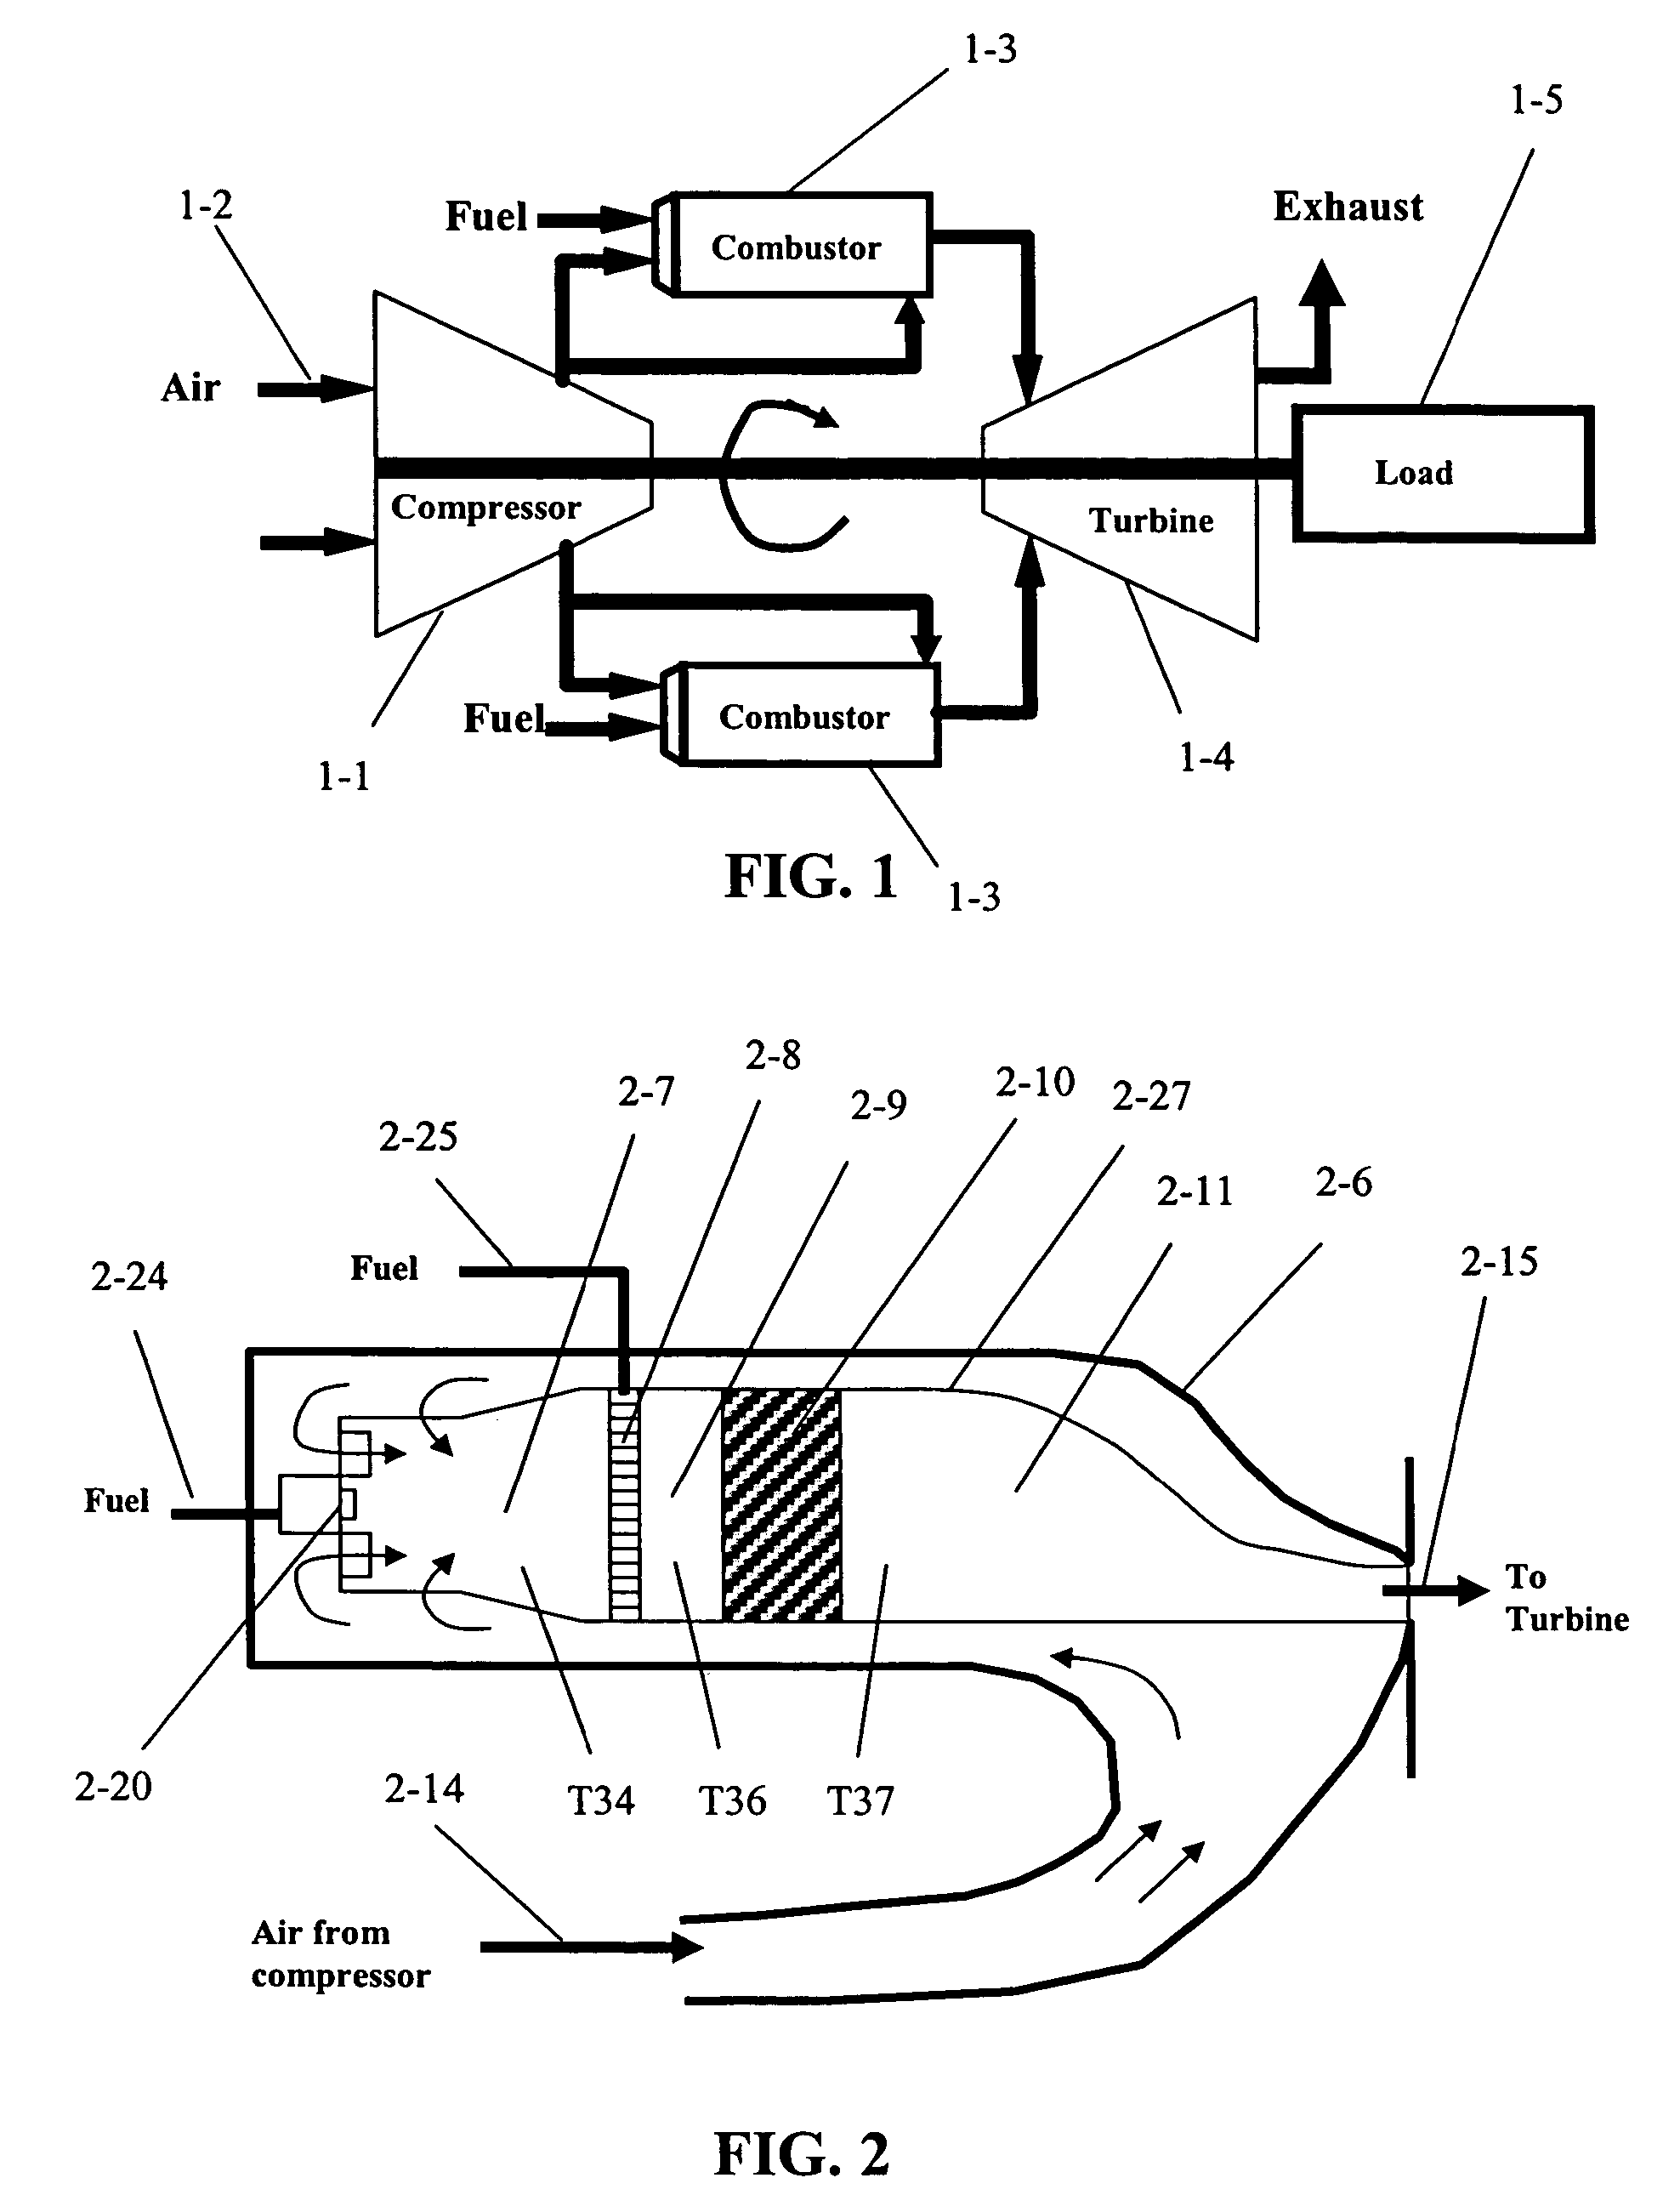 Dynamic control system and method for multi-combustor catalytic gas turbine engine